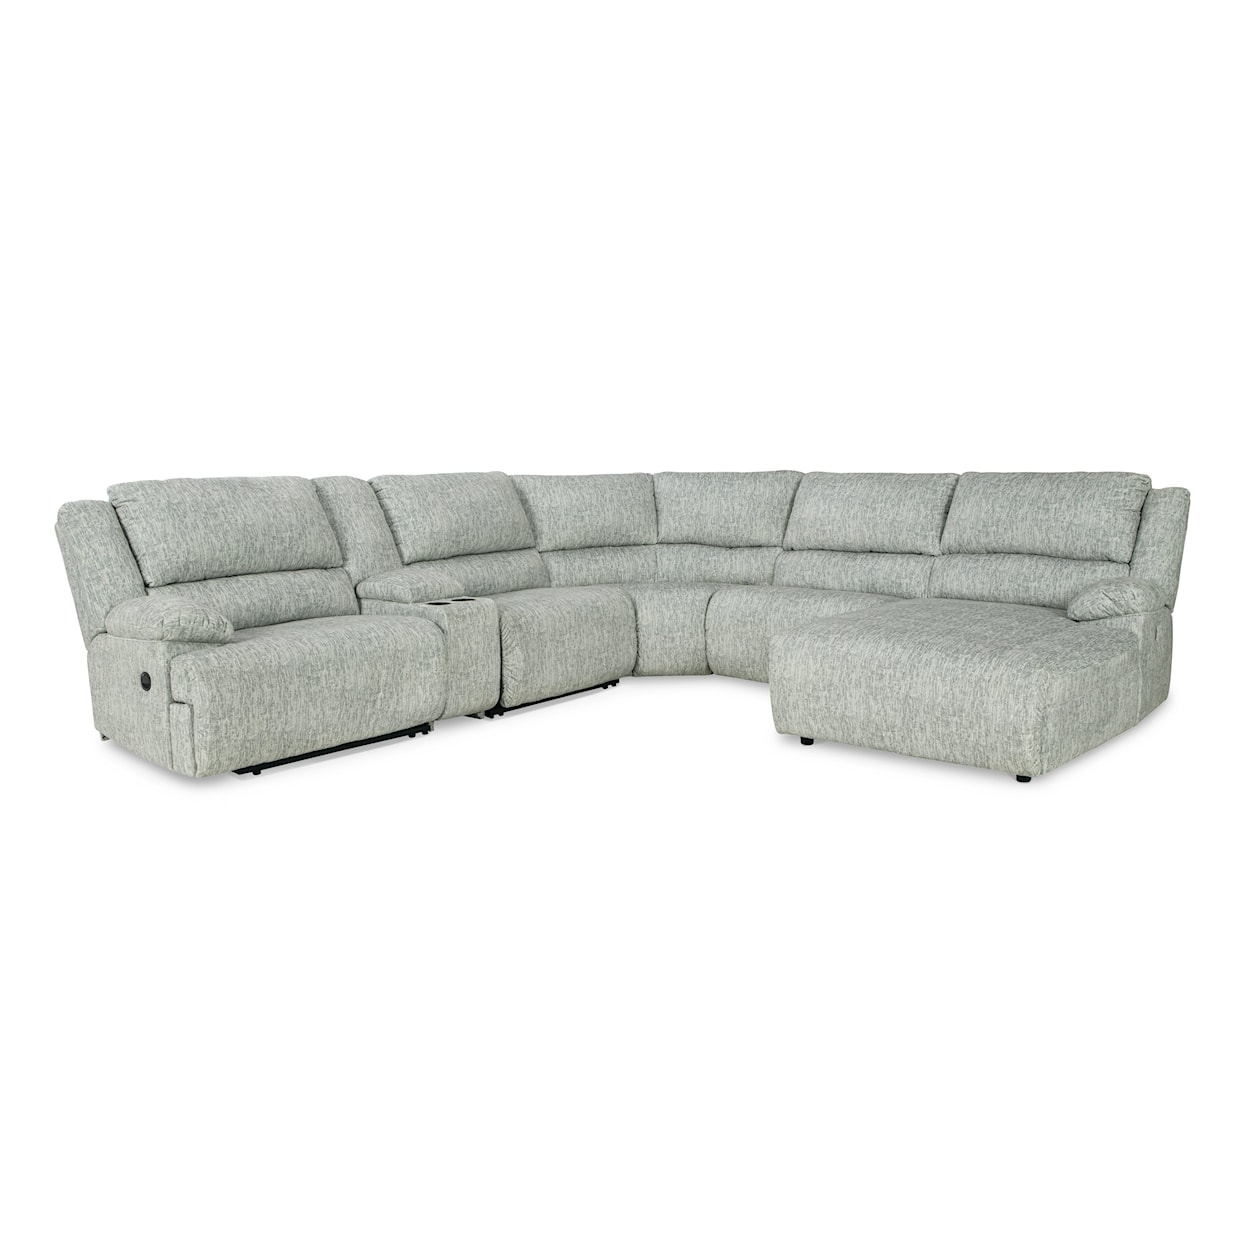 Ashley Furniture Signature Design McClelland 6-Piece Reclining Sectional with Chaise